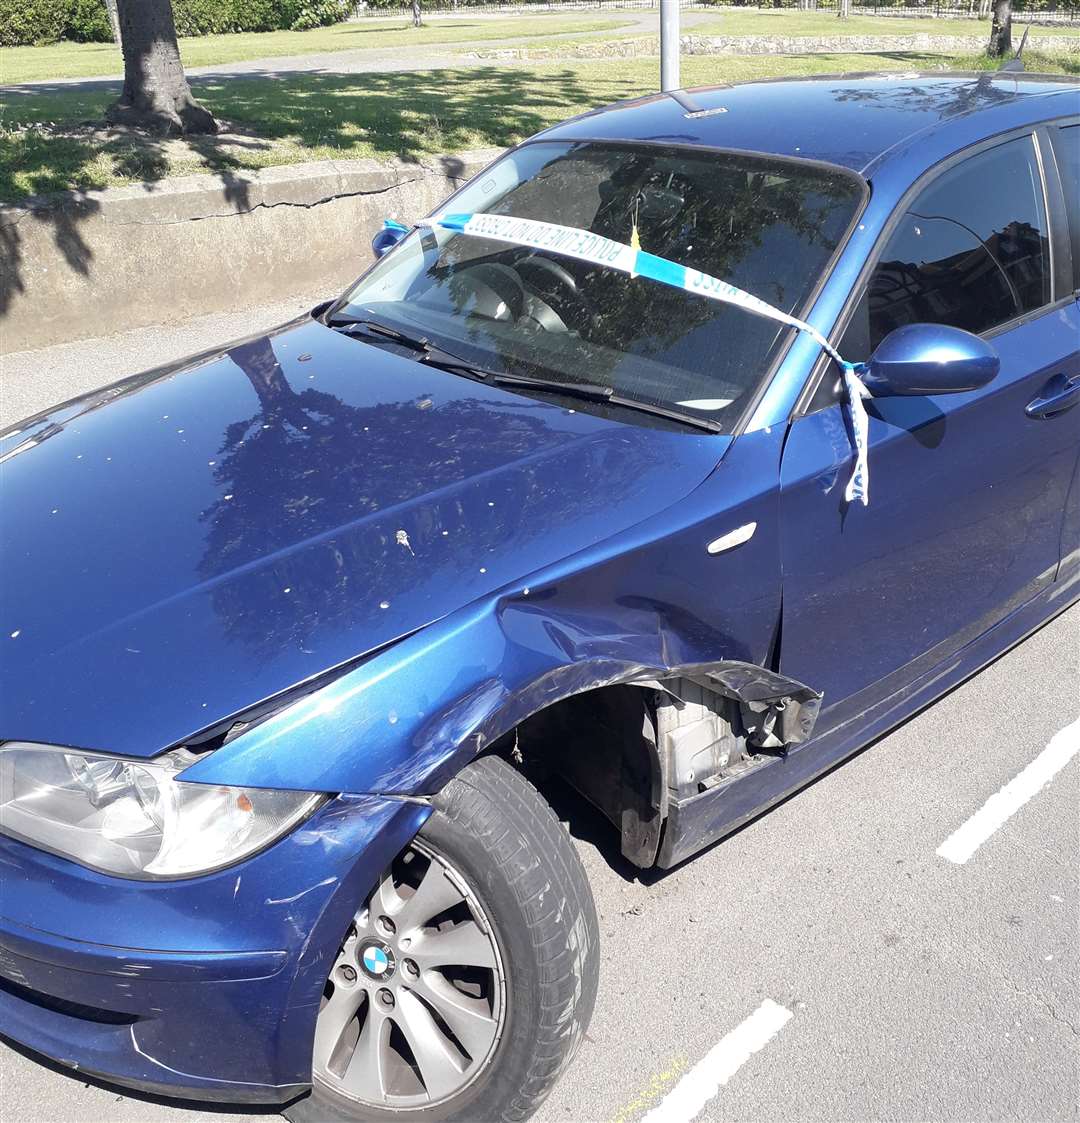 The parked car was damaged in the crash (10357397)